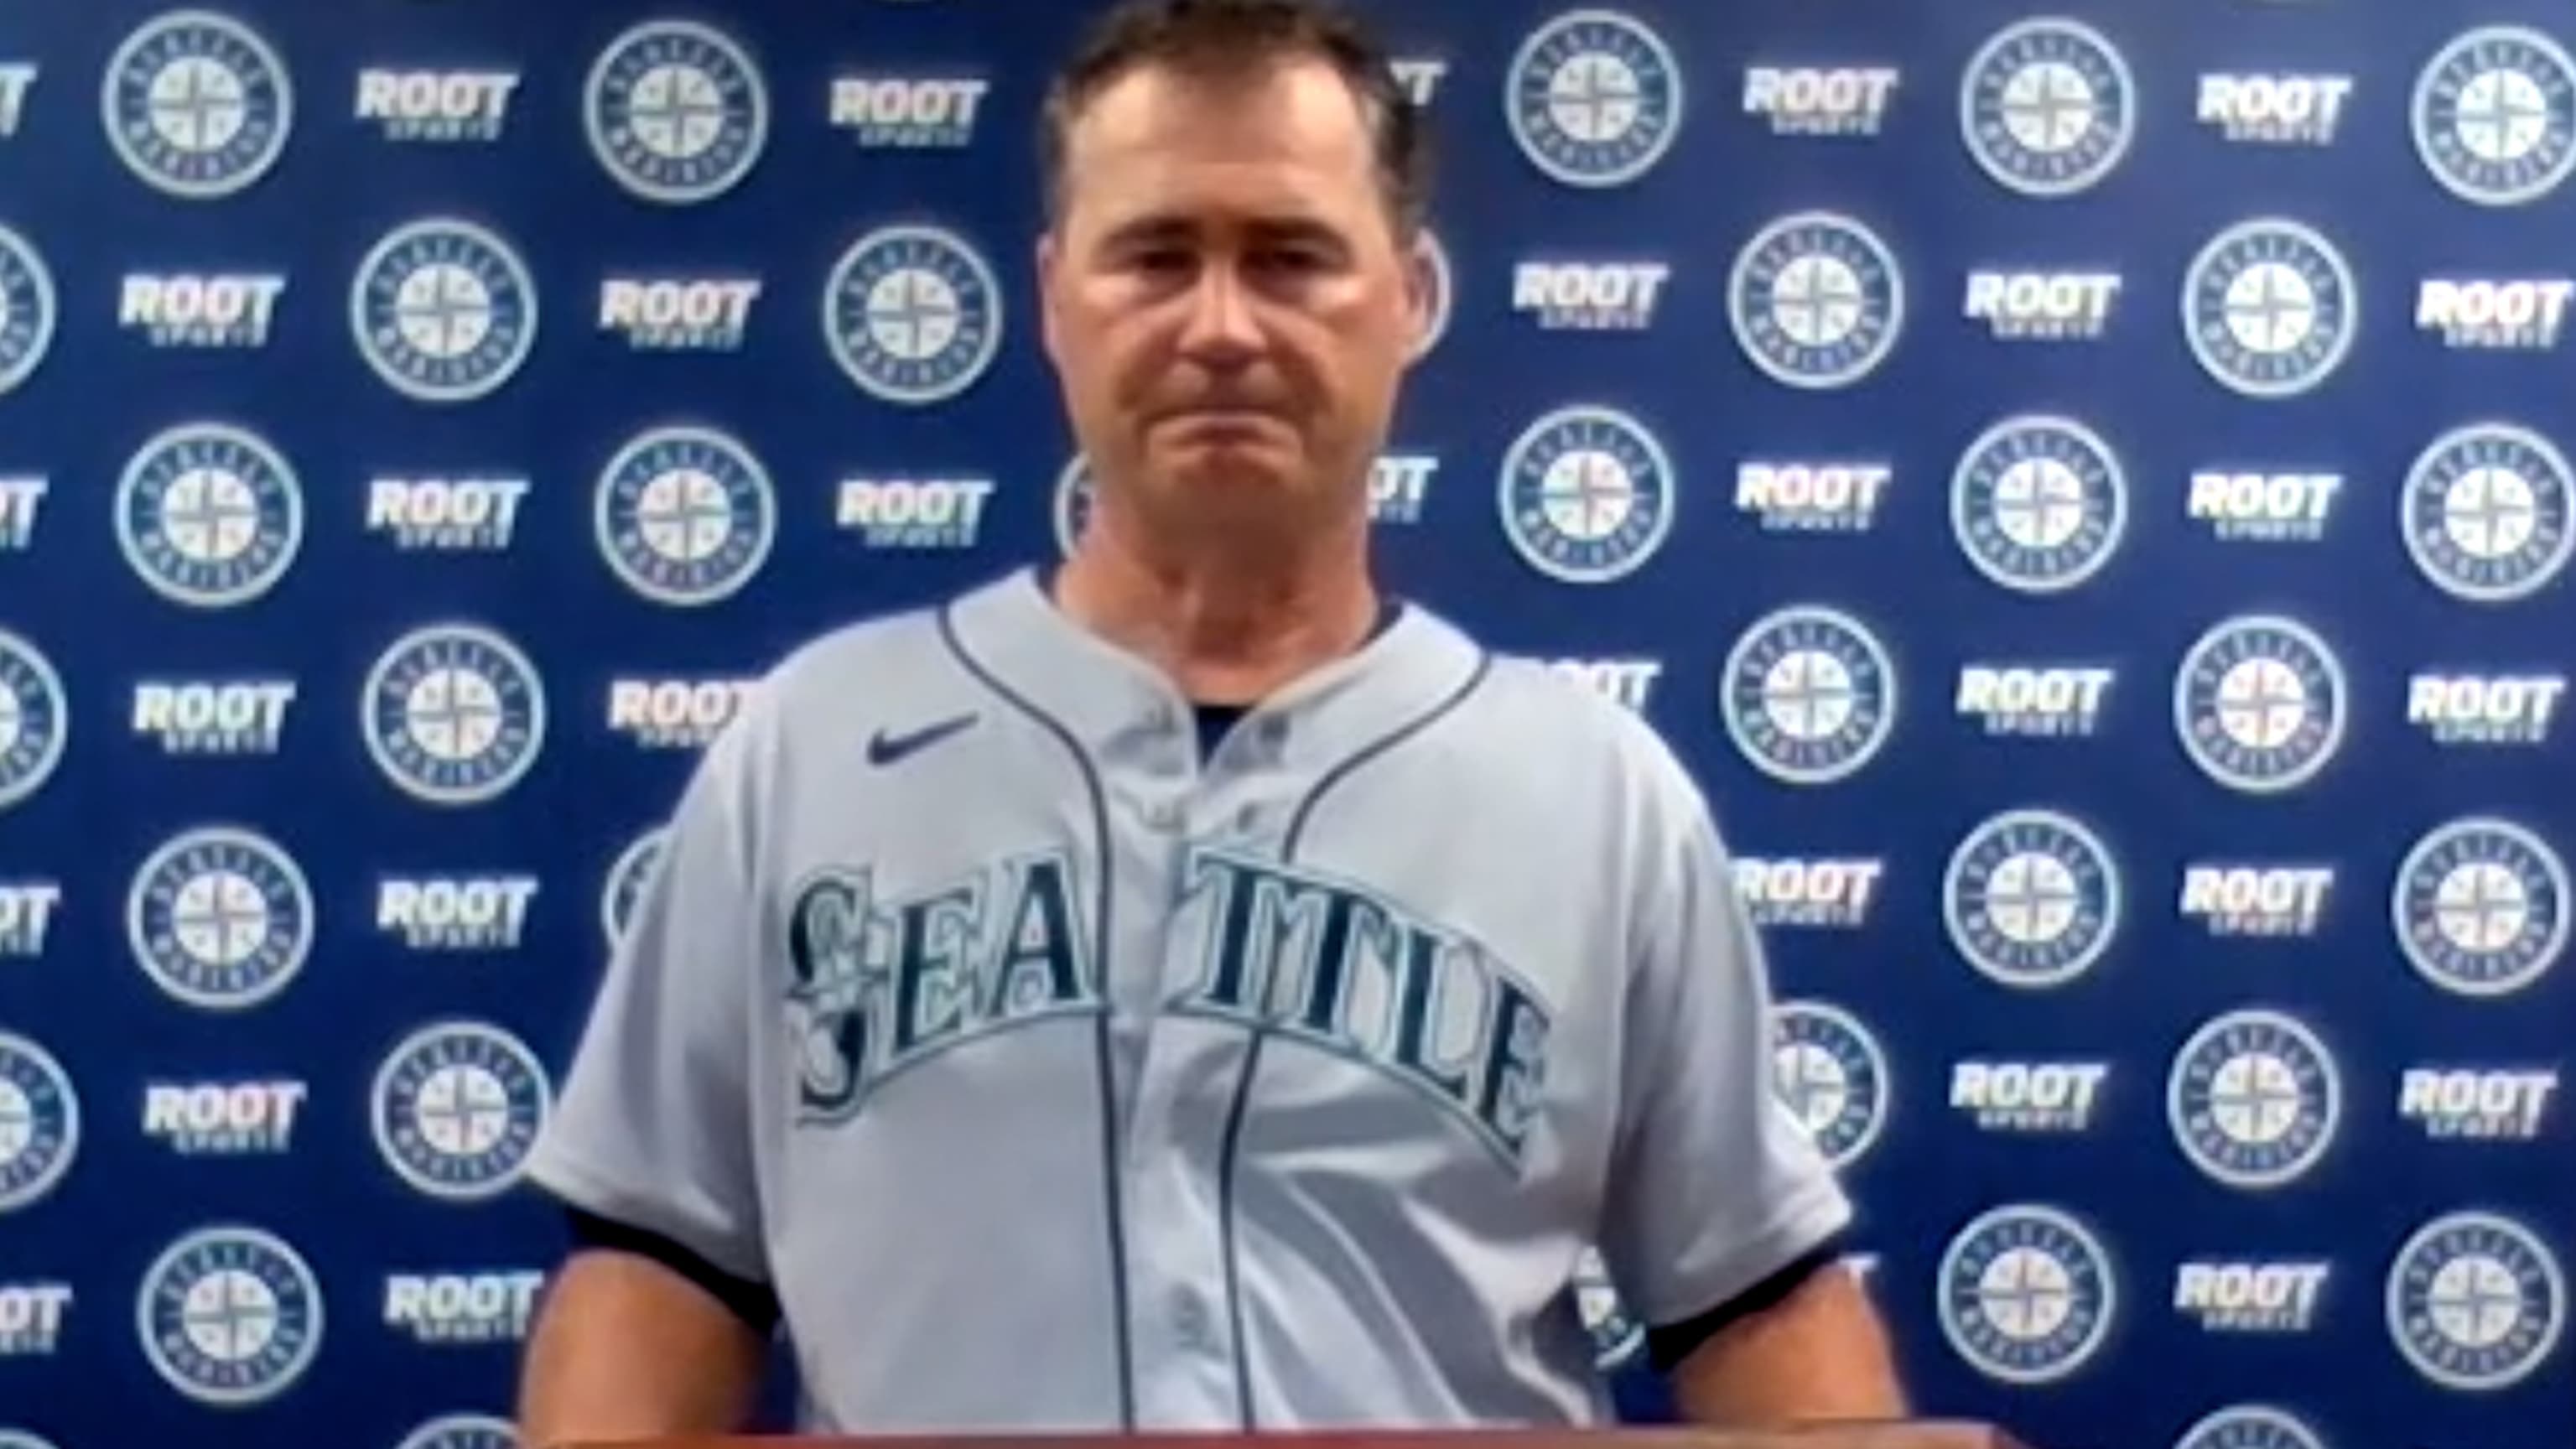 Mariners' Servais 'can't say enough about the job' Kyle Seager has